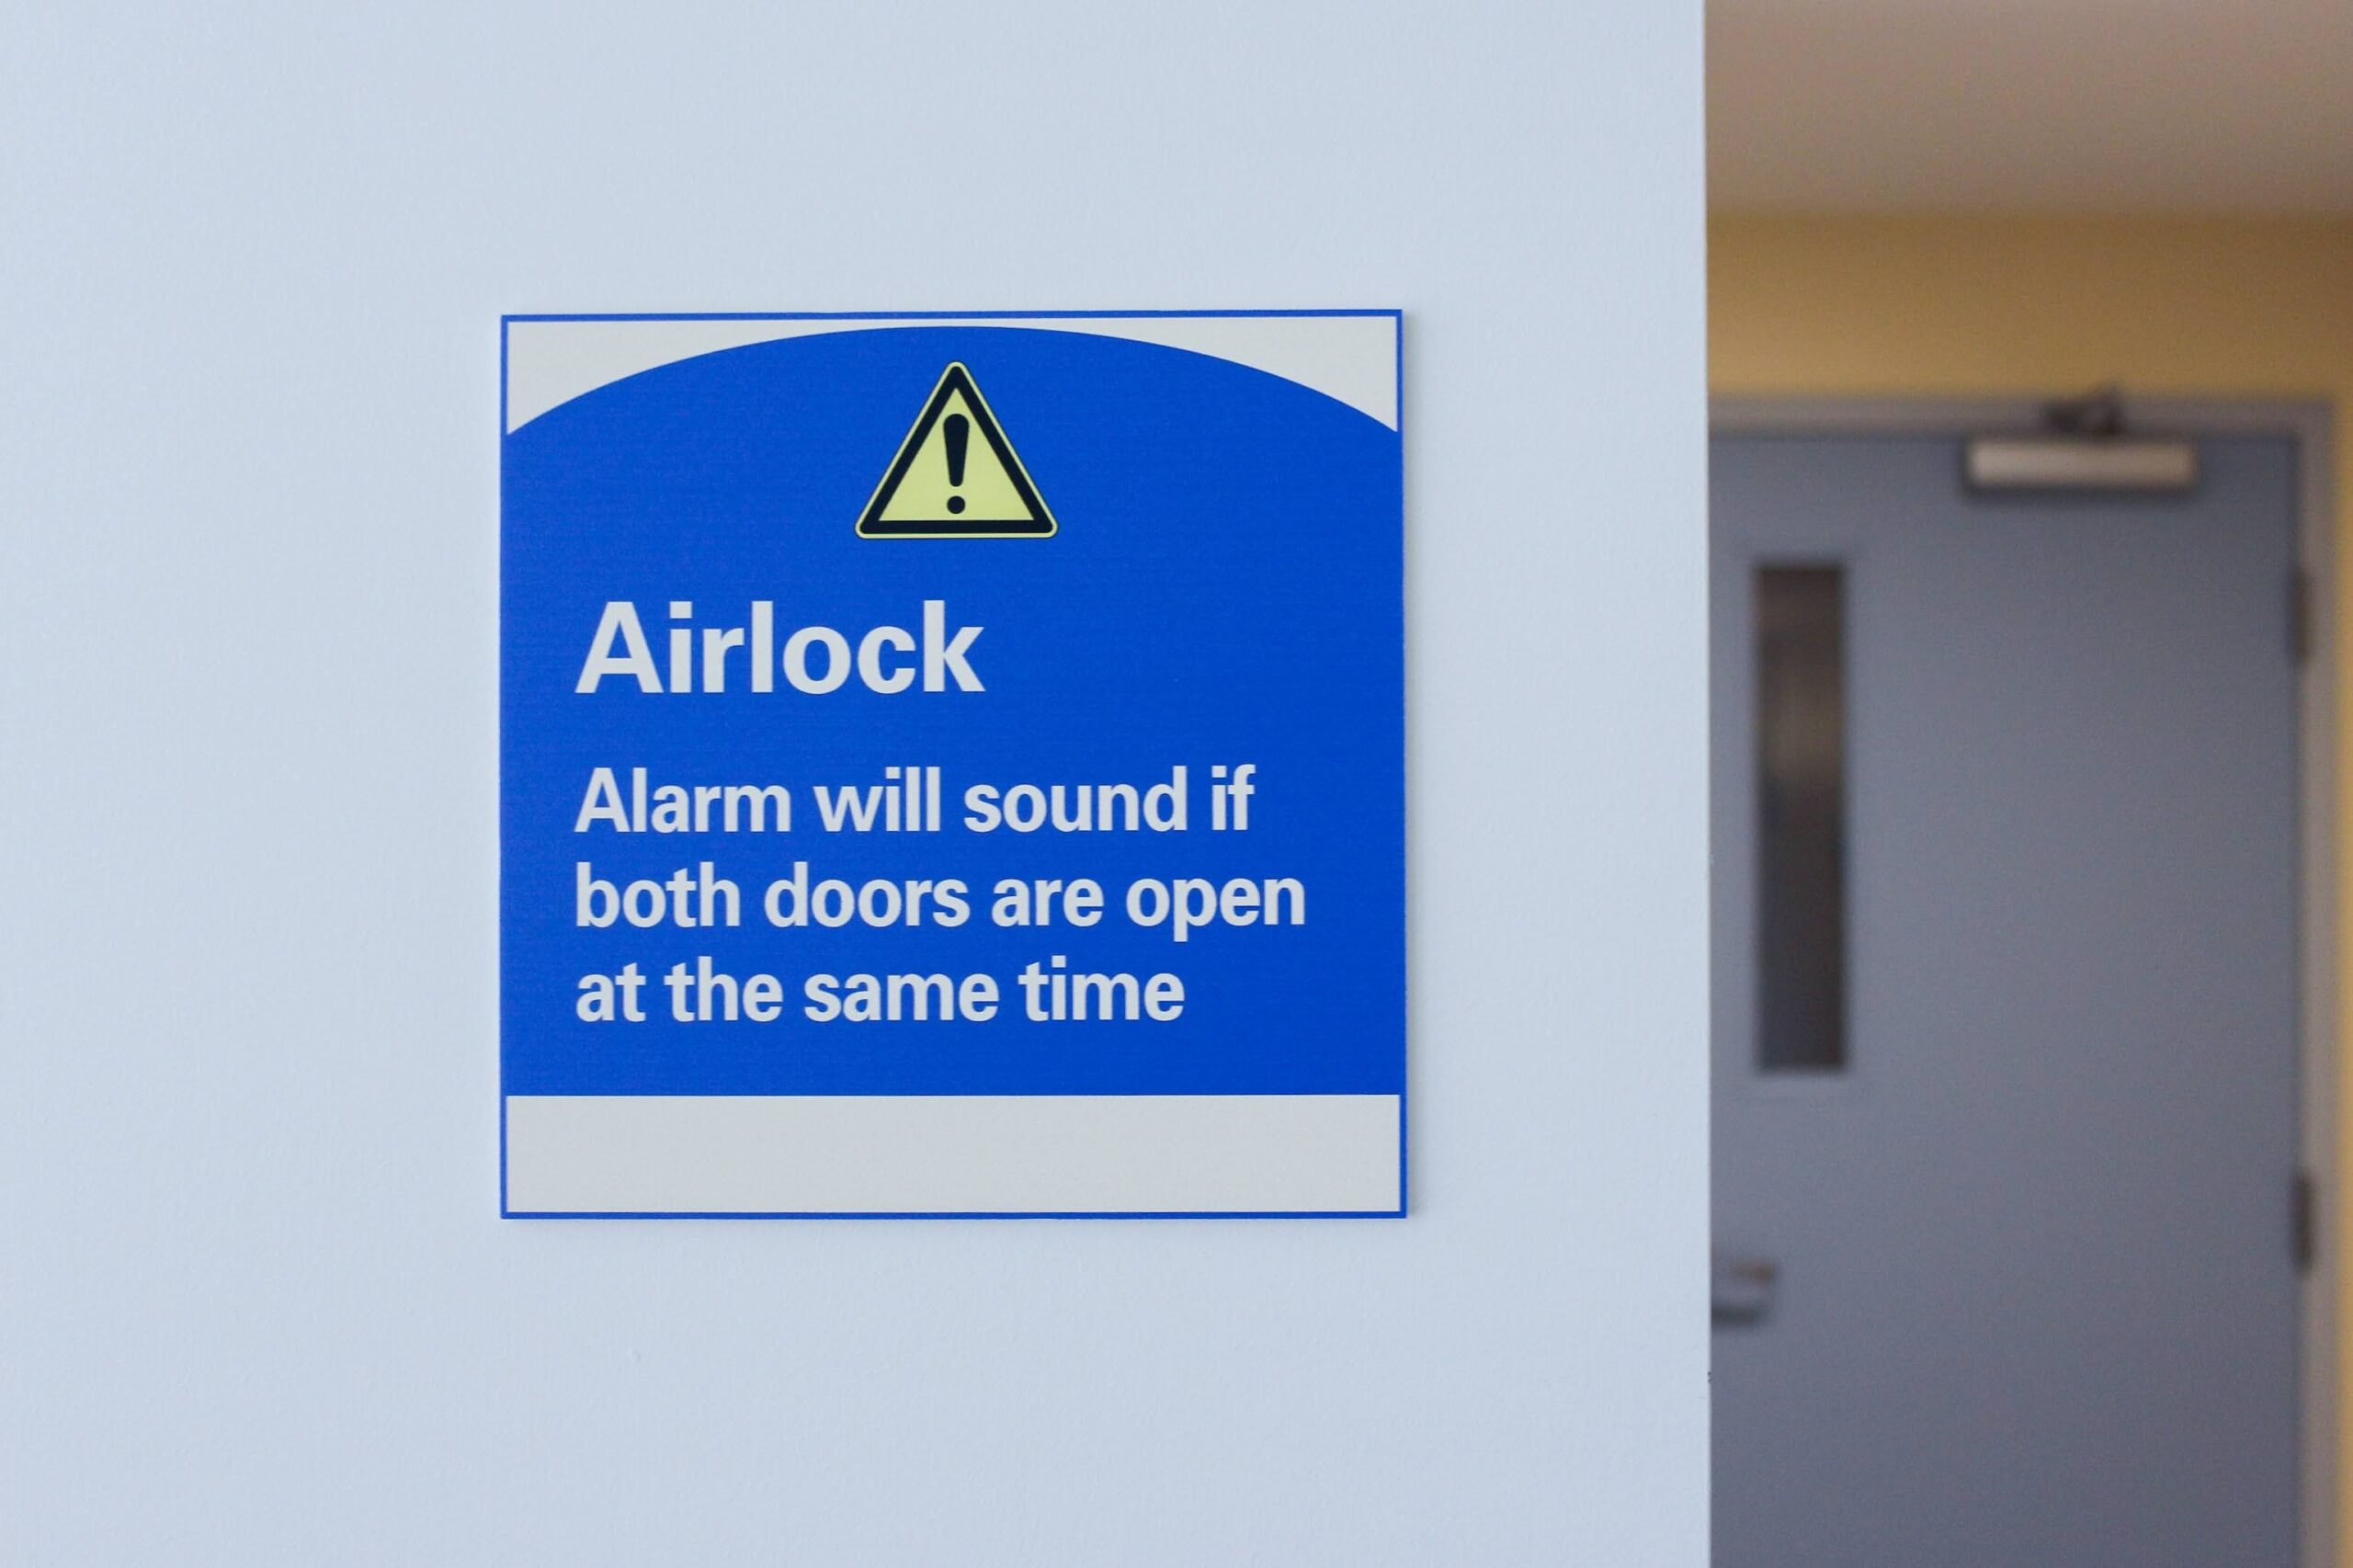 A sign warning that people are entering a hospital's airlock area.